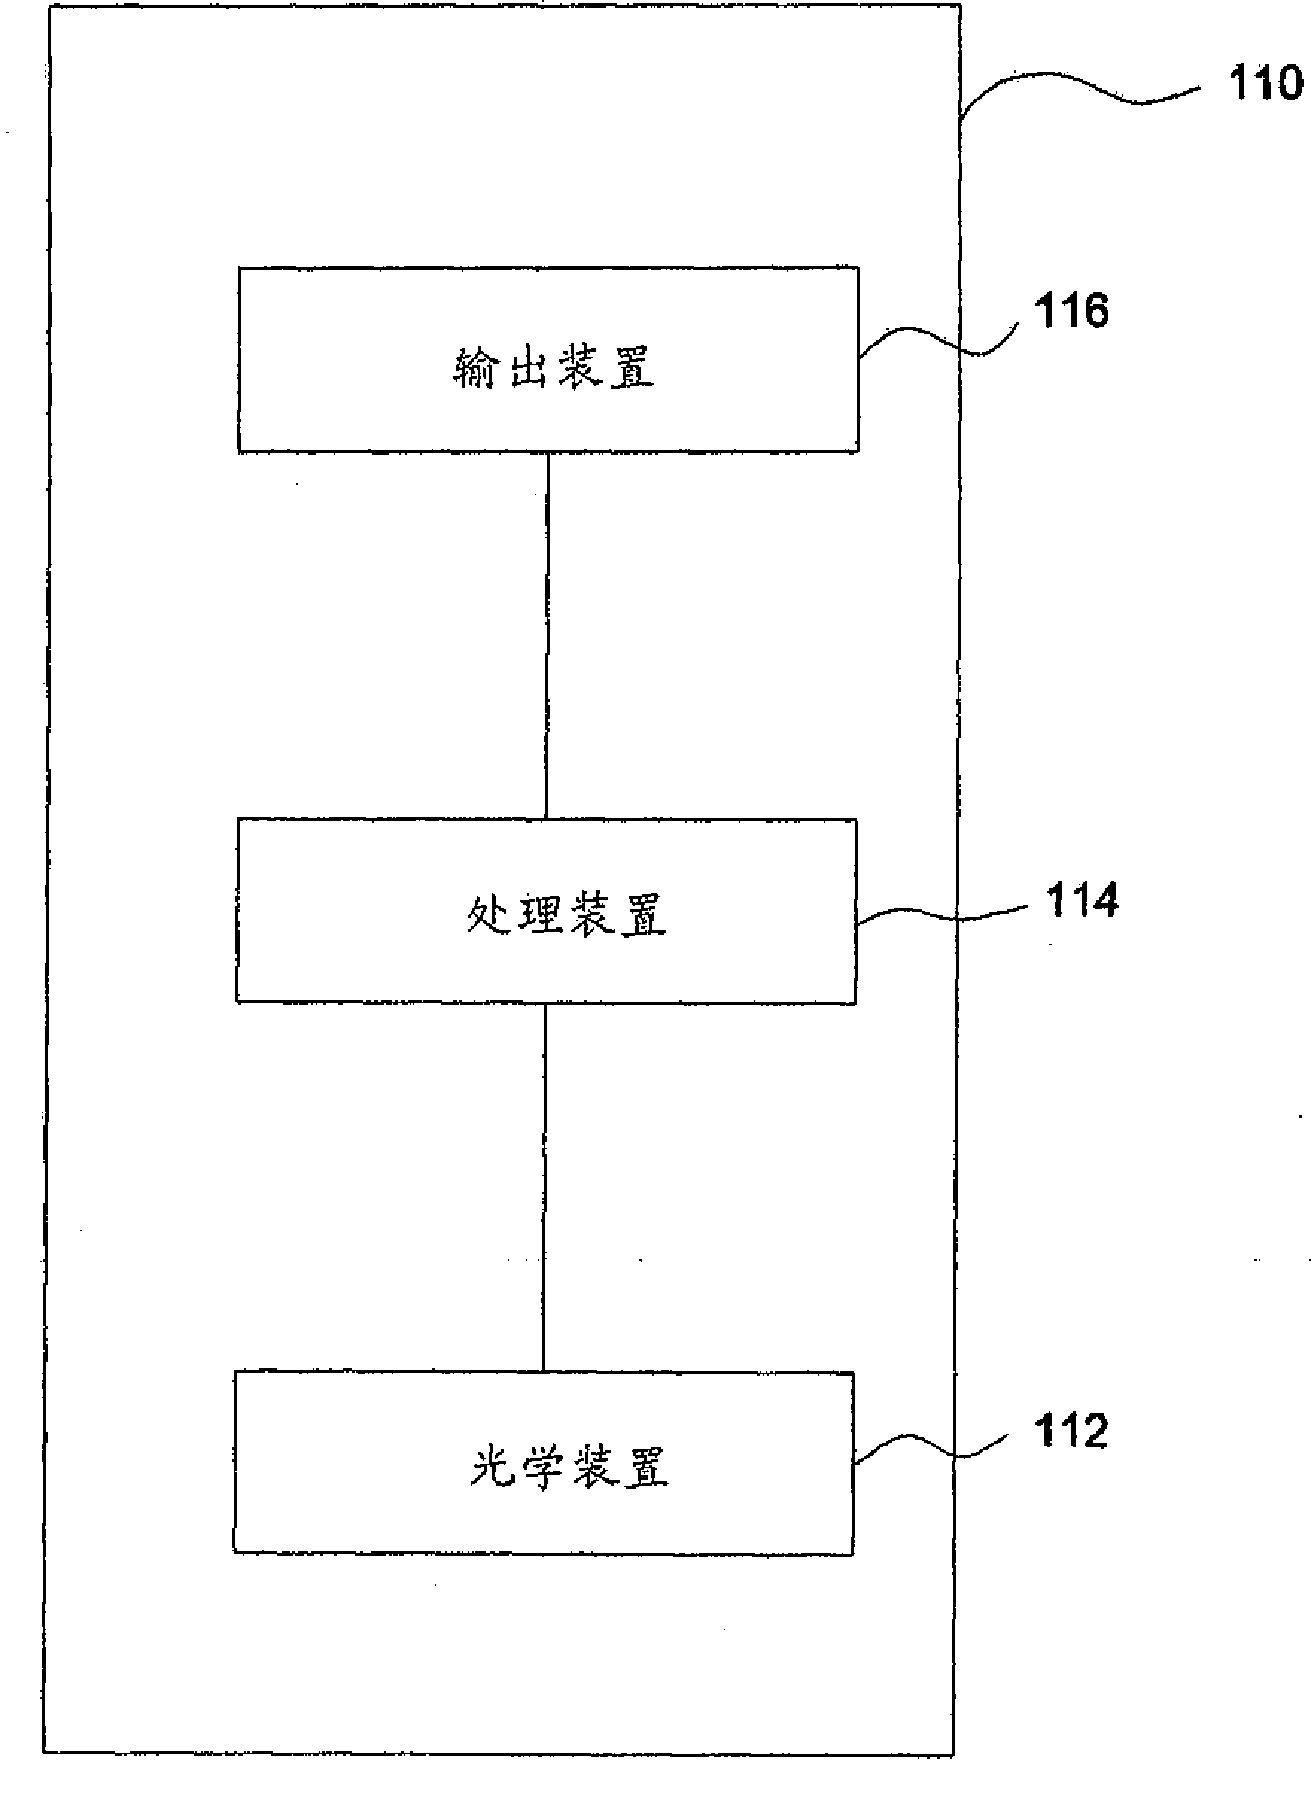 Data output/input method with application of image index structure